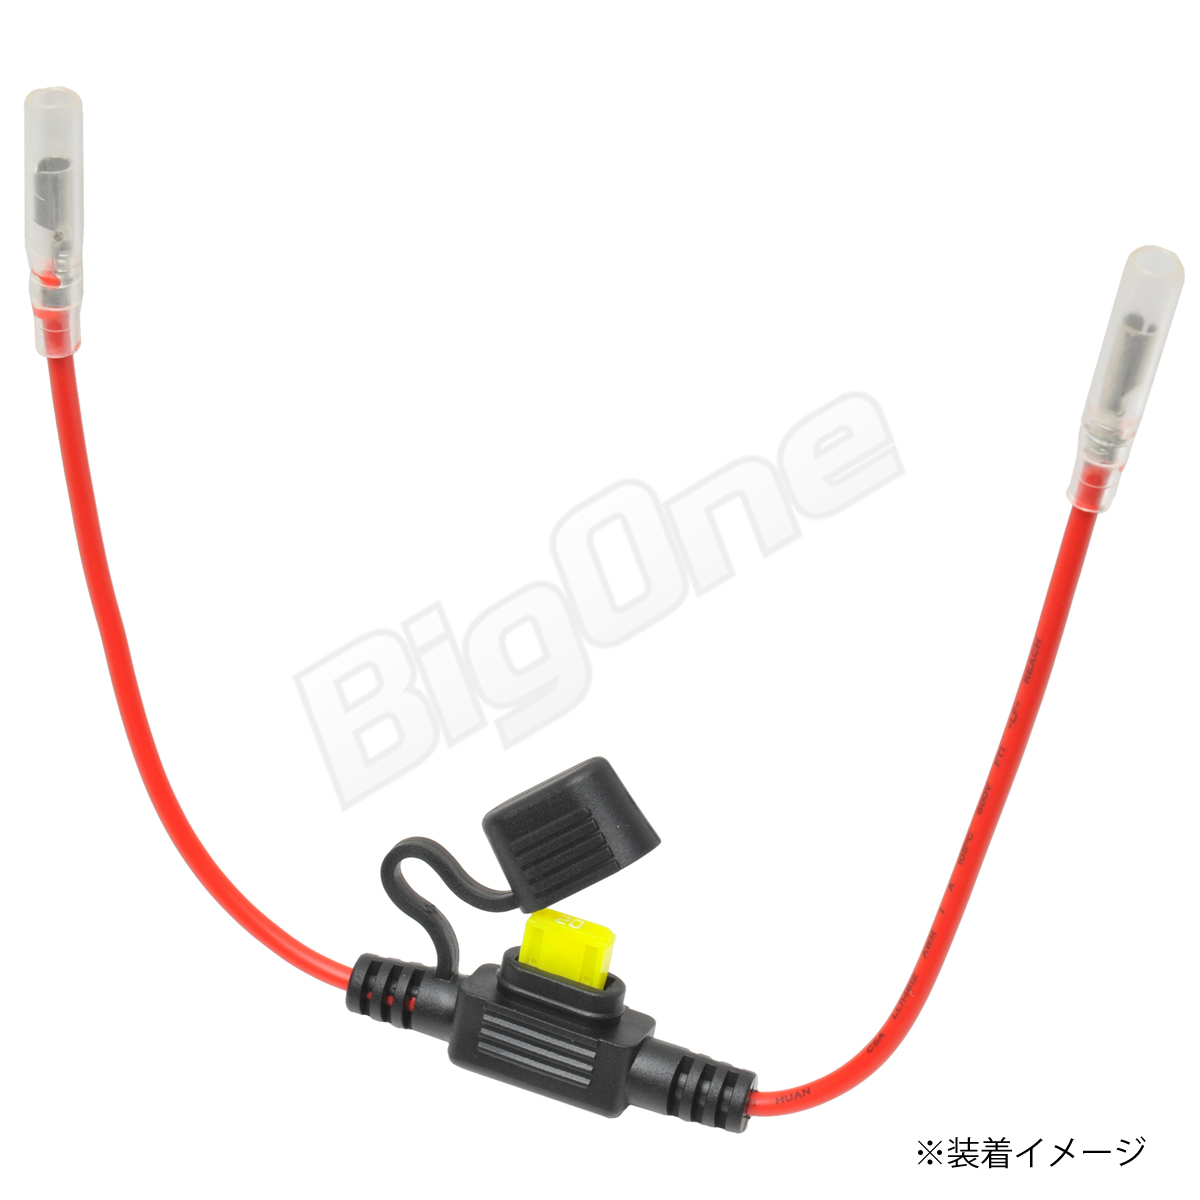 BigOne rainproof Mini flat type fuse holder ASP box cap connector code attaching wiring LED chigar lighter ETC drive recorder. connection 